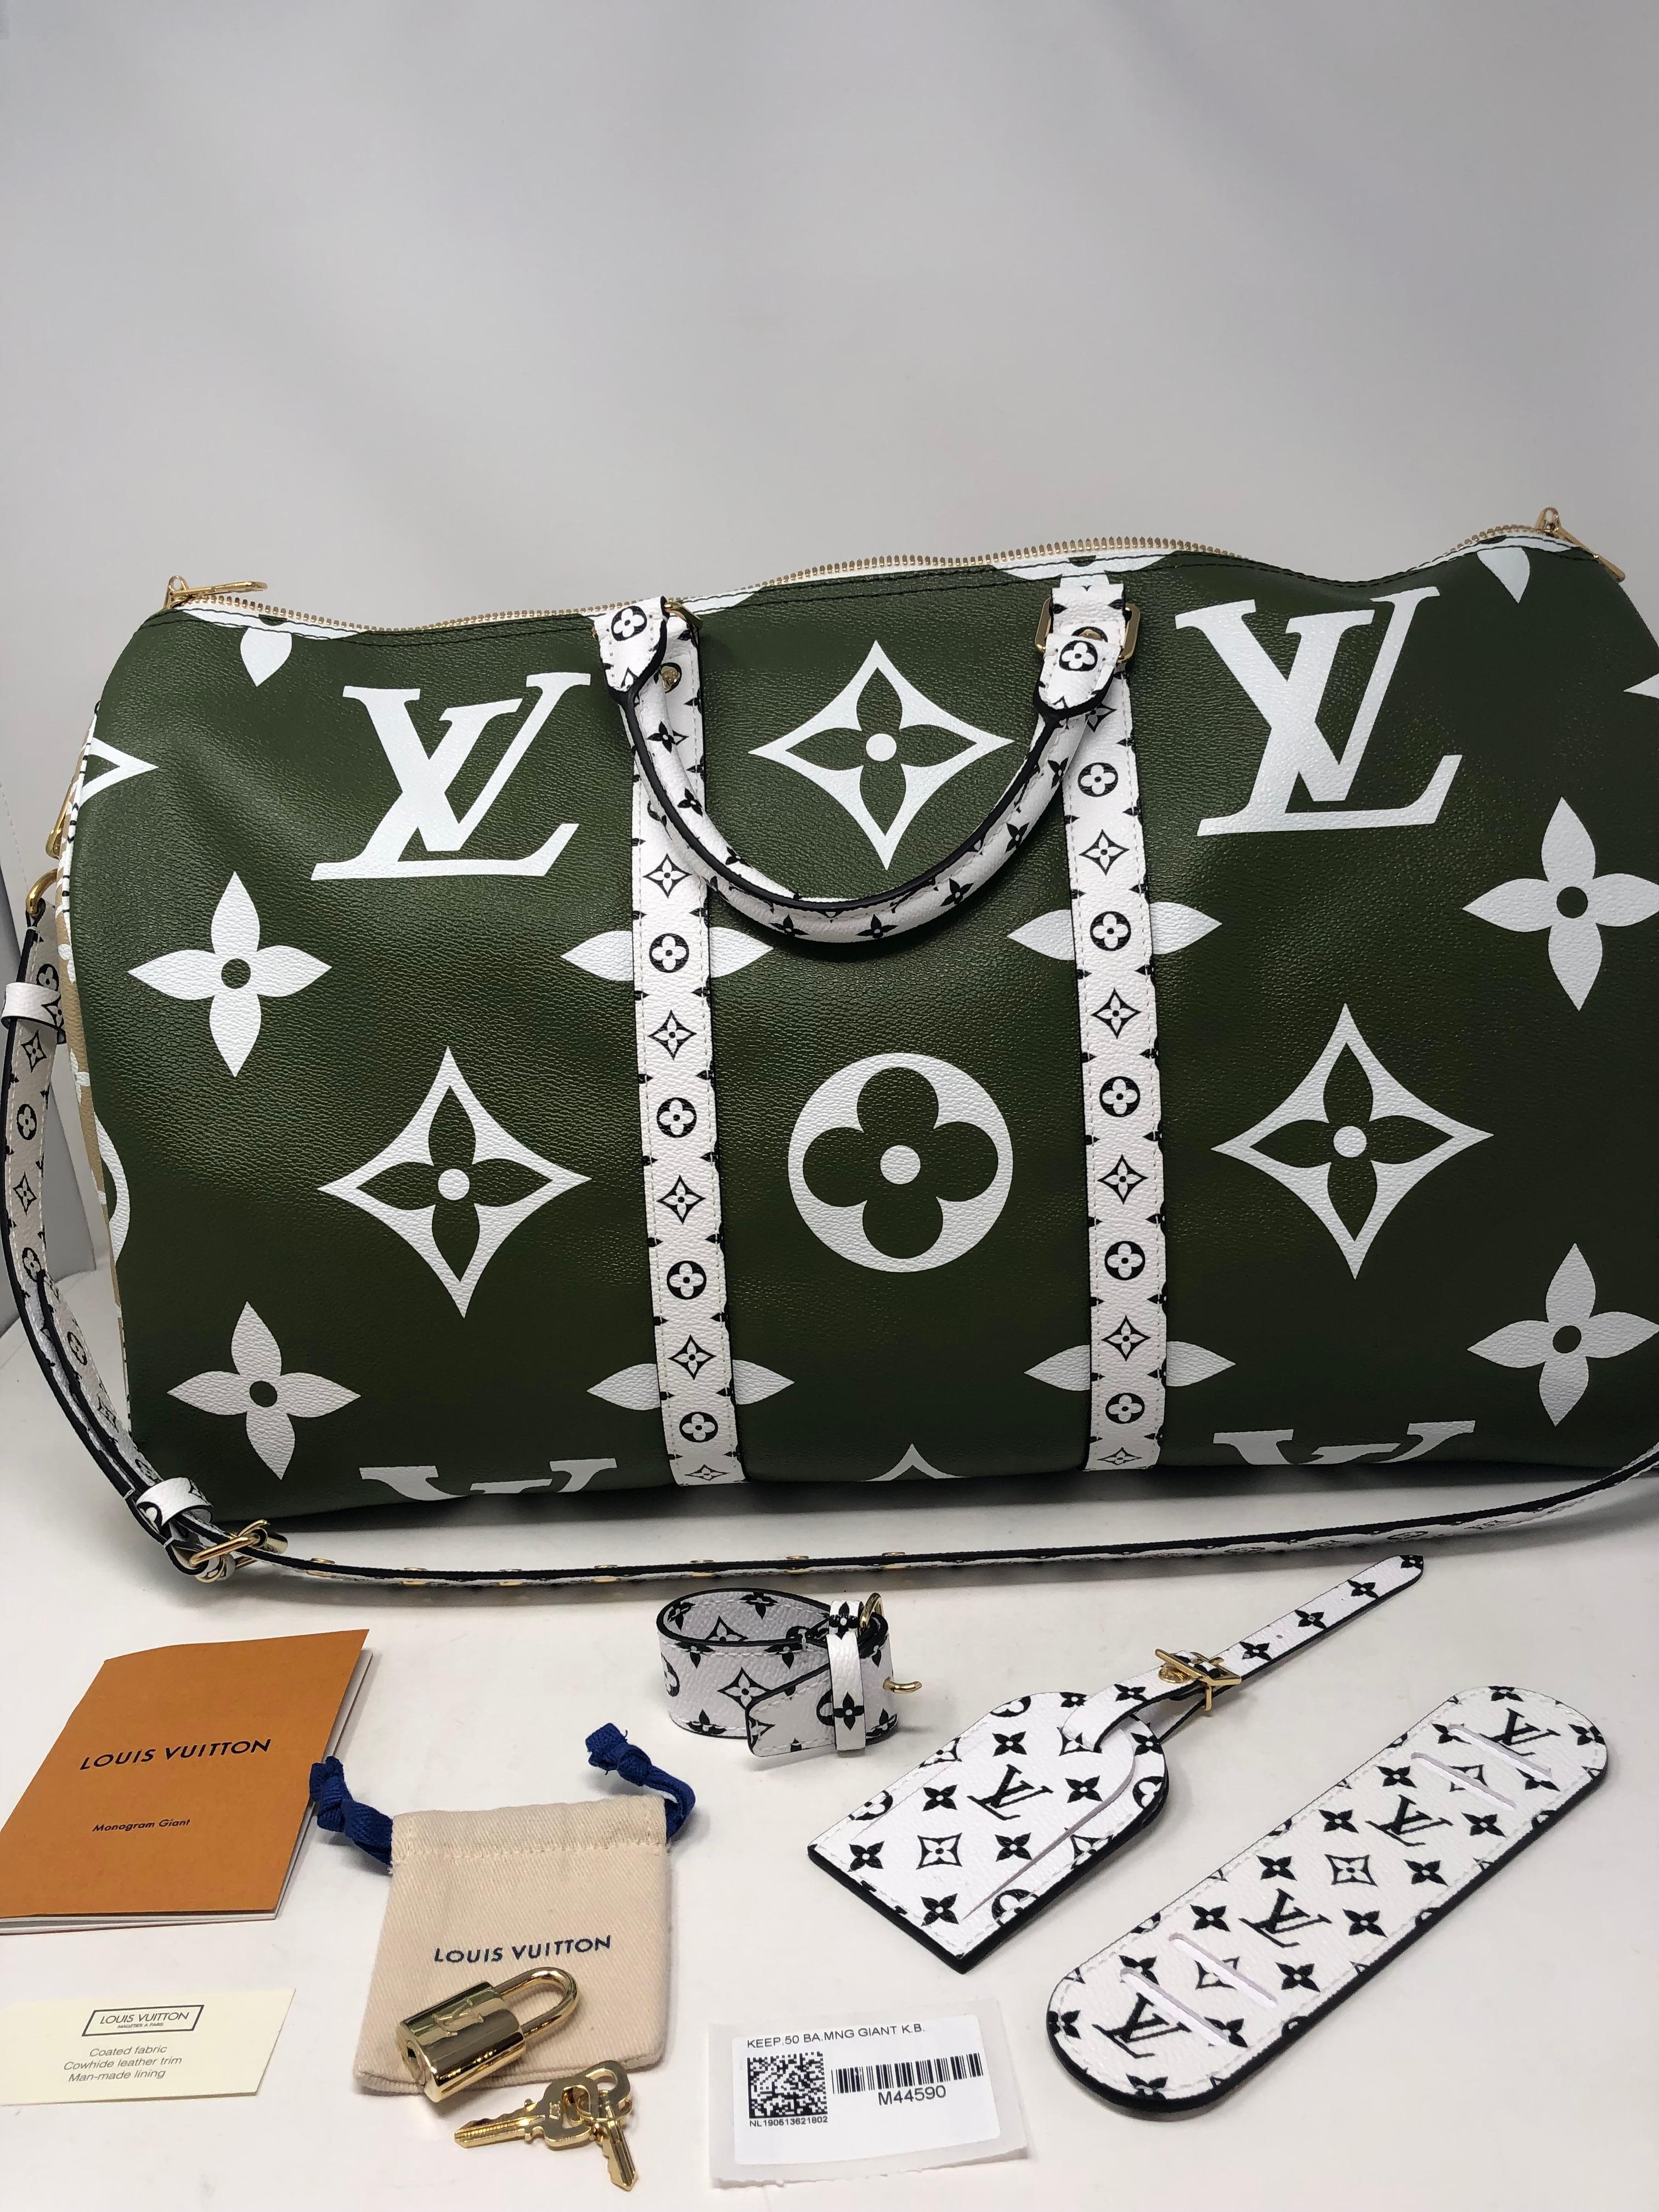 Louis Vuitton Keepall Bandouliere Mono Giant 50 Khaki Green and Beige. Limited Edition travel duffle in oversized monogram print. Green, beige and white color. White and black mono strap that is adjustable. Brand new and never used. Collector's